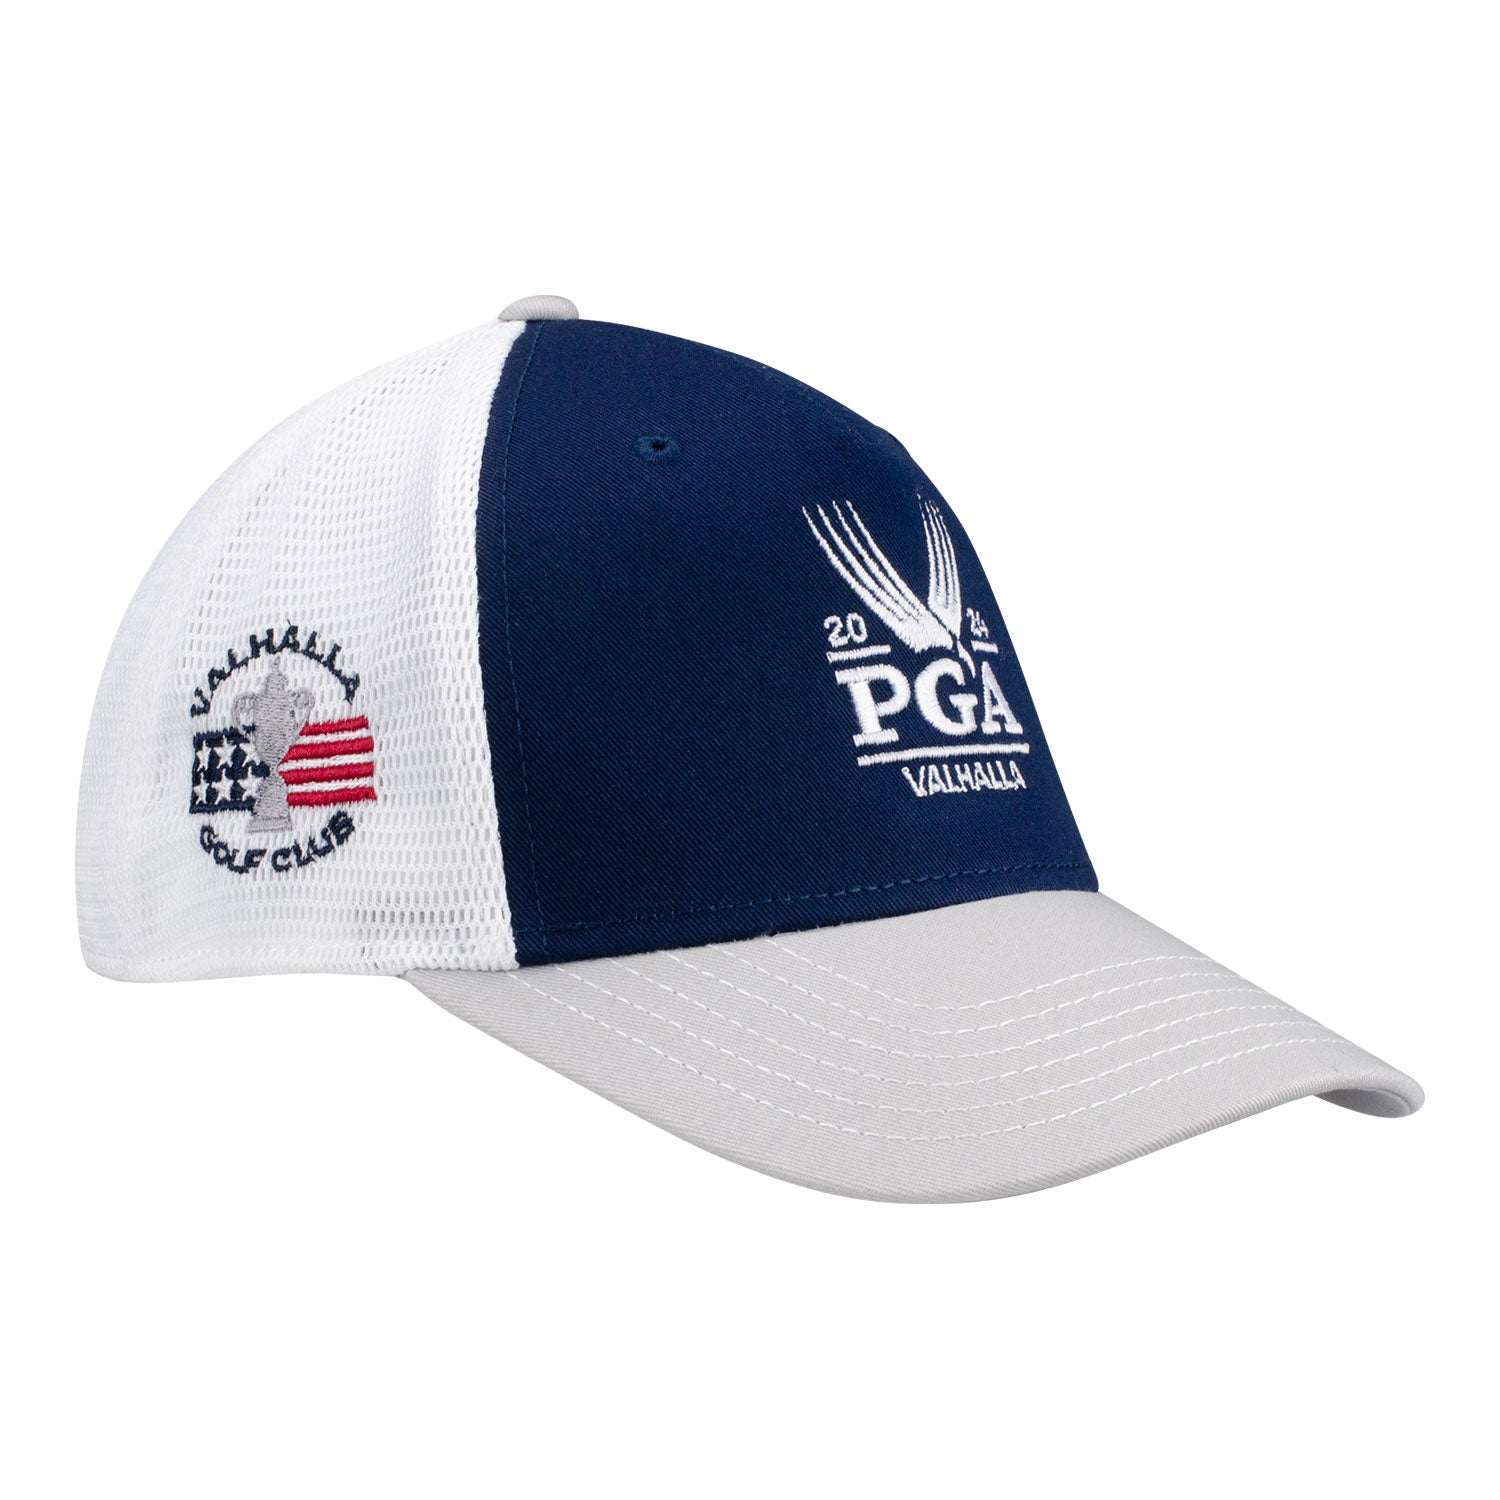 Ahead 2024 PGA Championship Classic - Fit Cotton Twill Mesh Back Adjustable Hat in Navy / Grey / White - Angled Front Right View